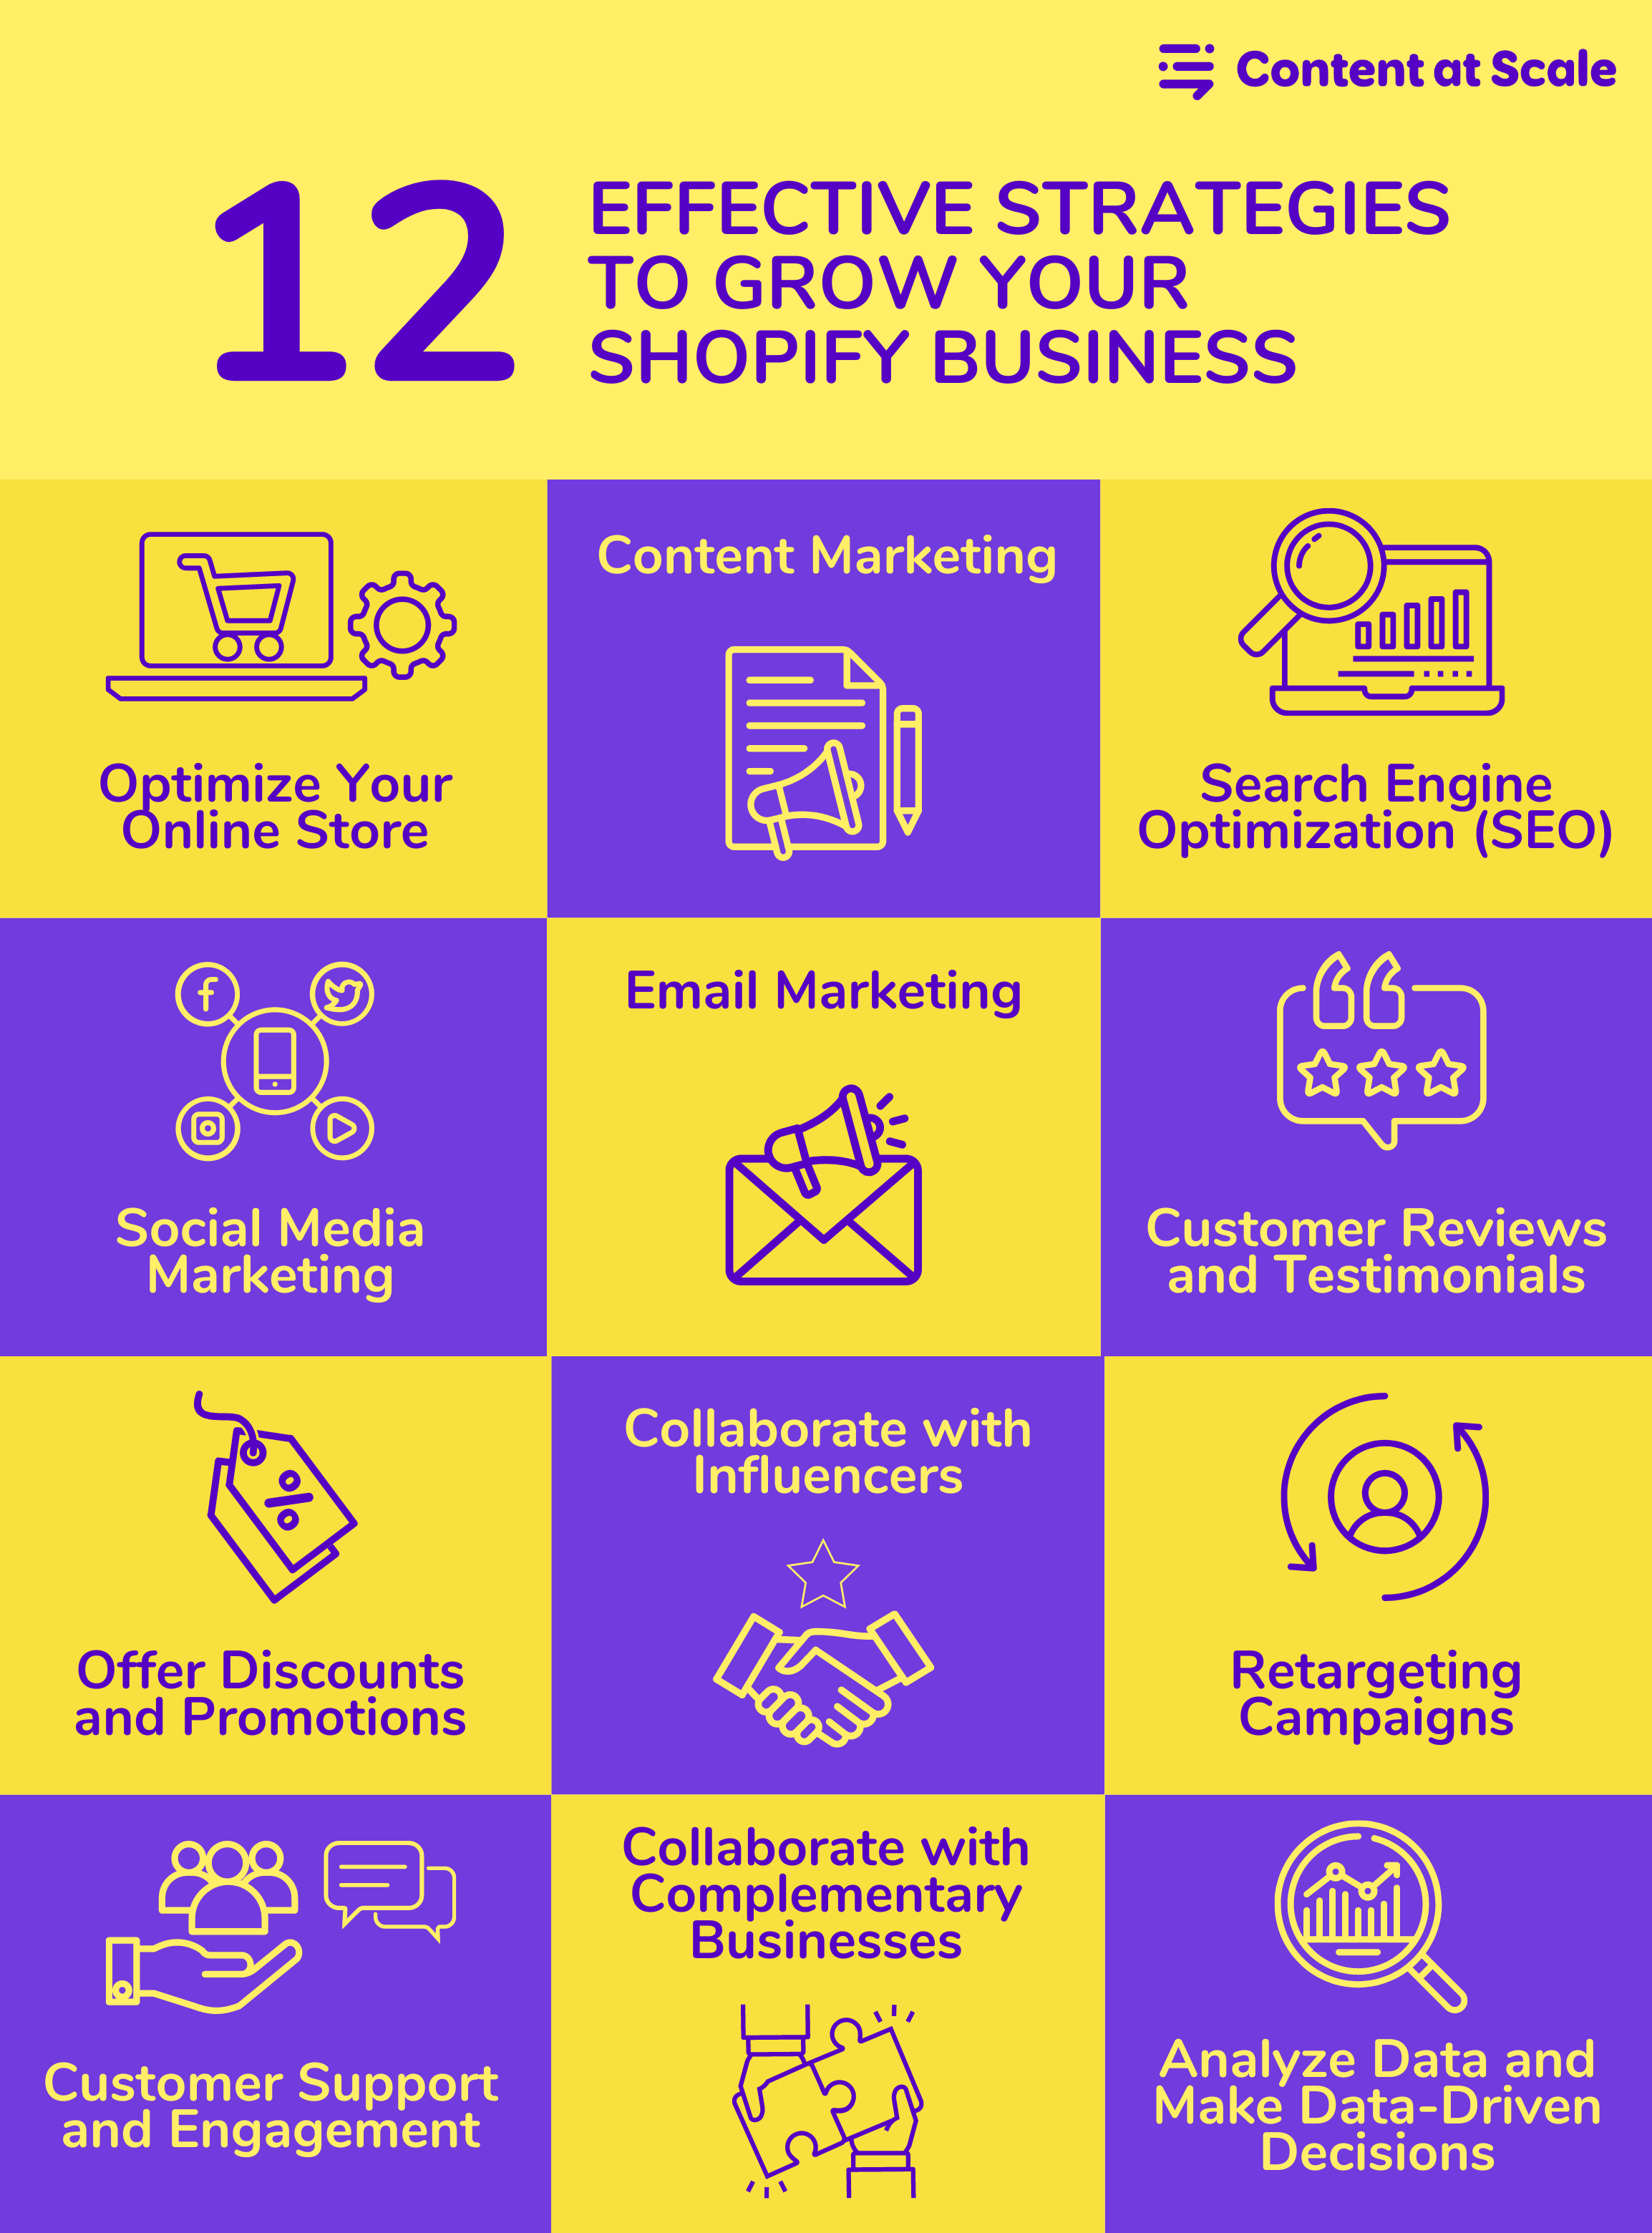 How to Grow Your Shopify Store: 7 Proven Methods - Content @ Scale